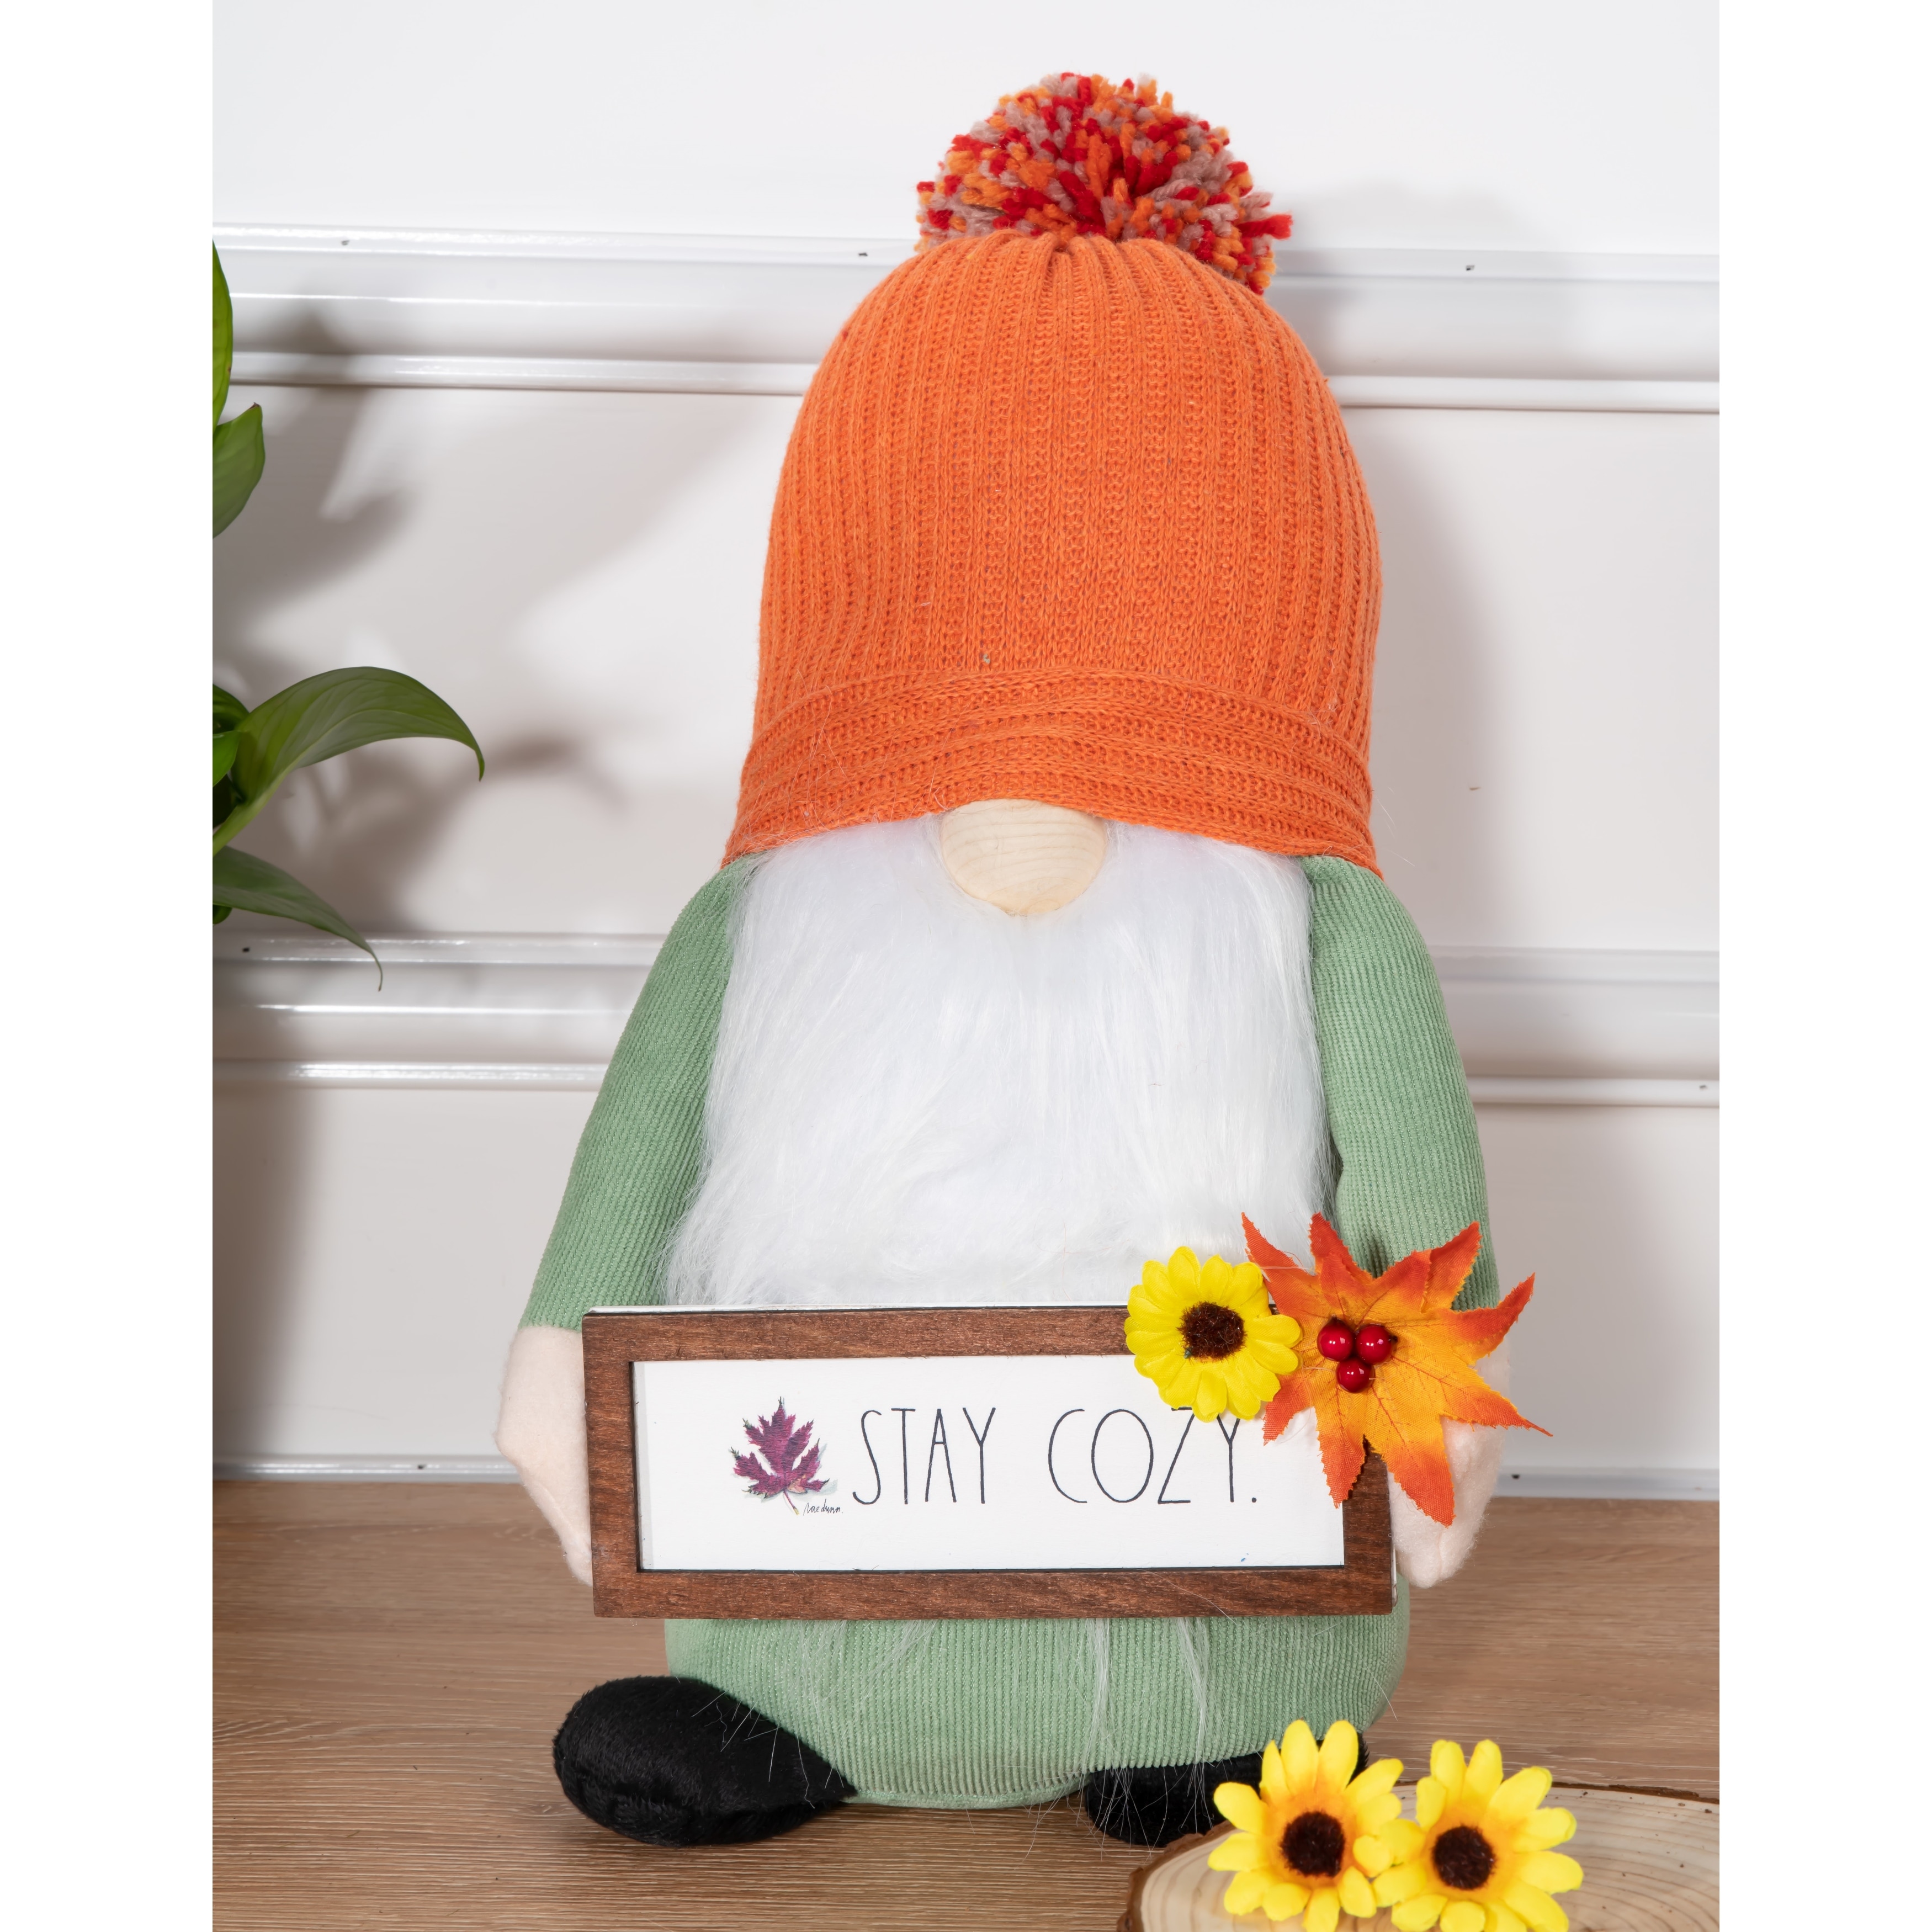  Rae Dunn Set for Women with Gnome Decor - Fall Gifts